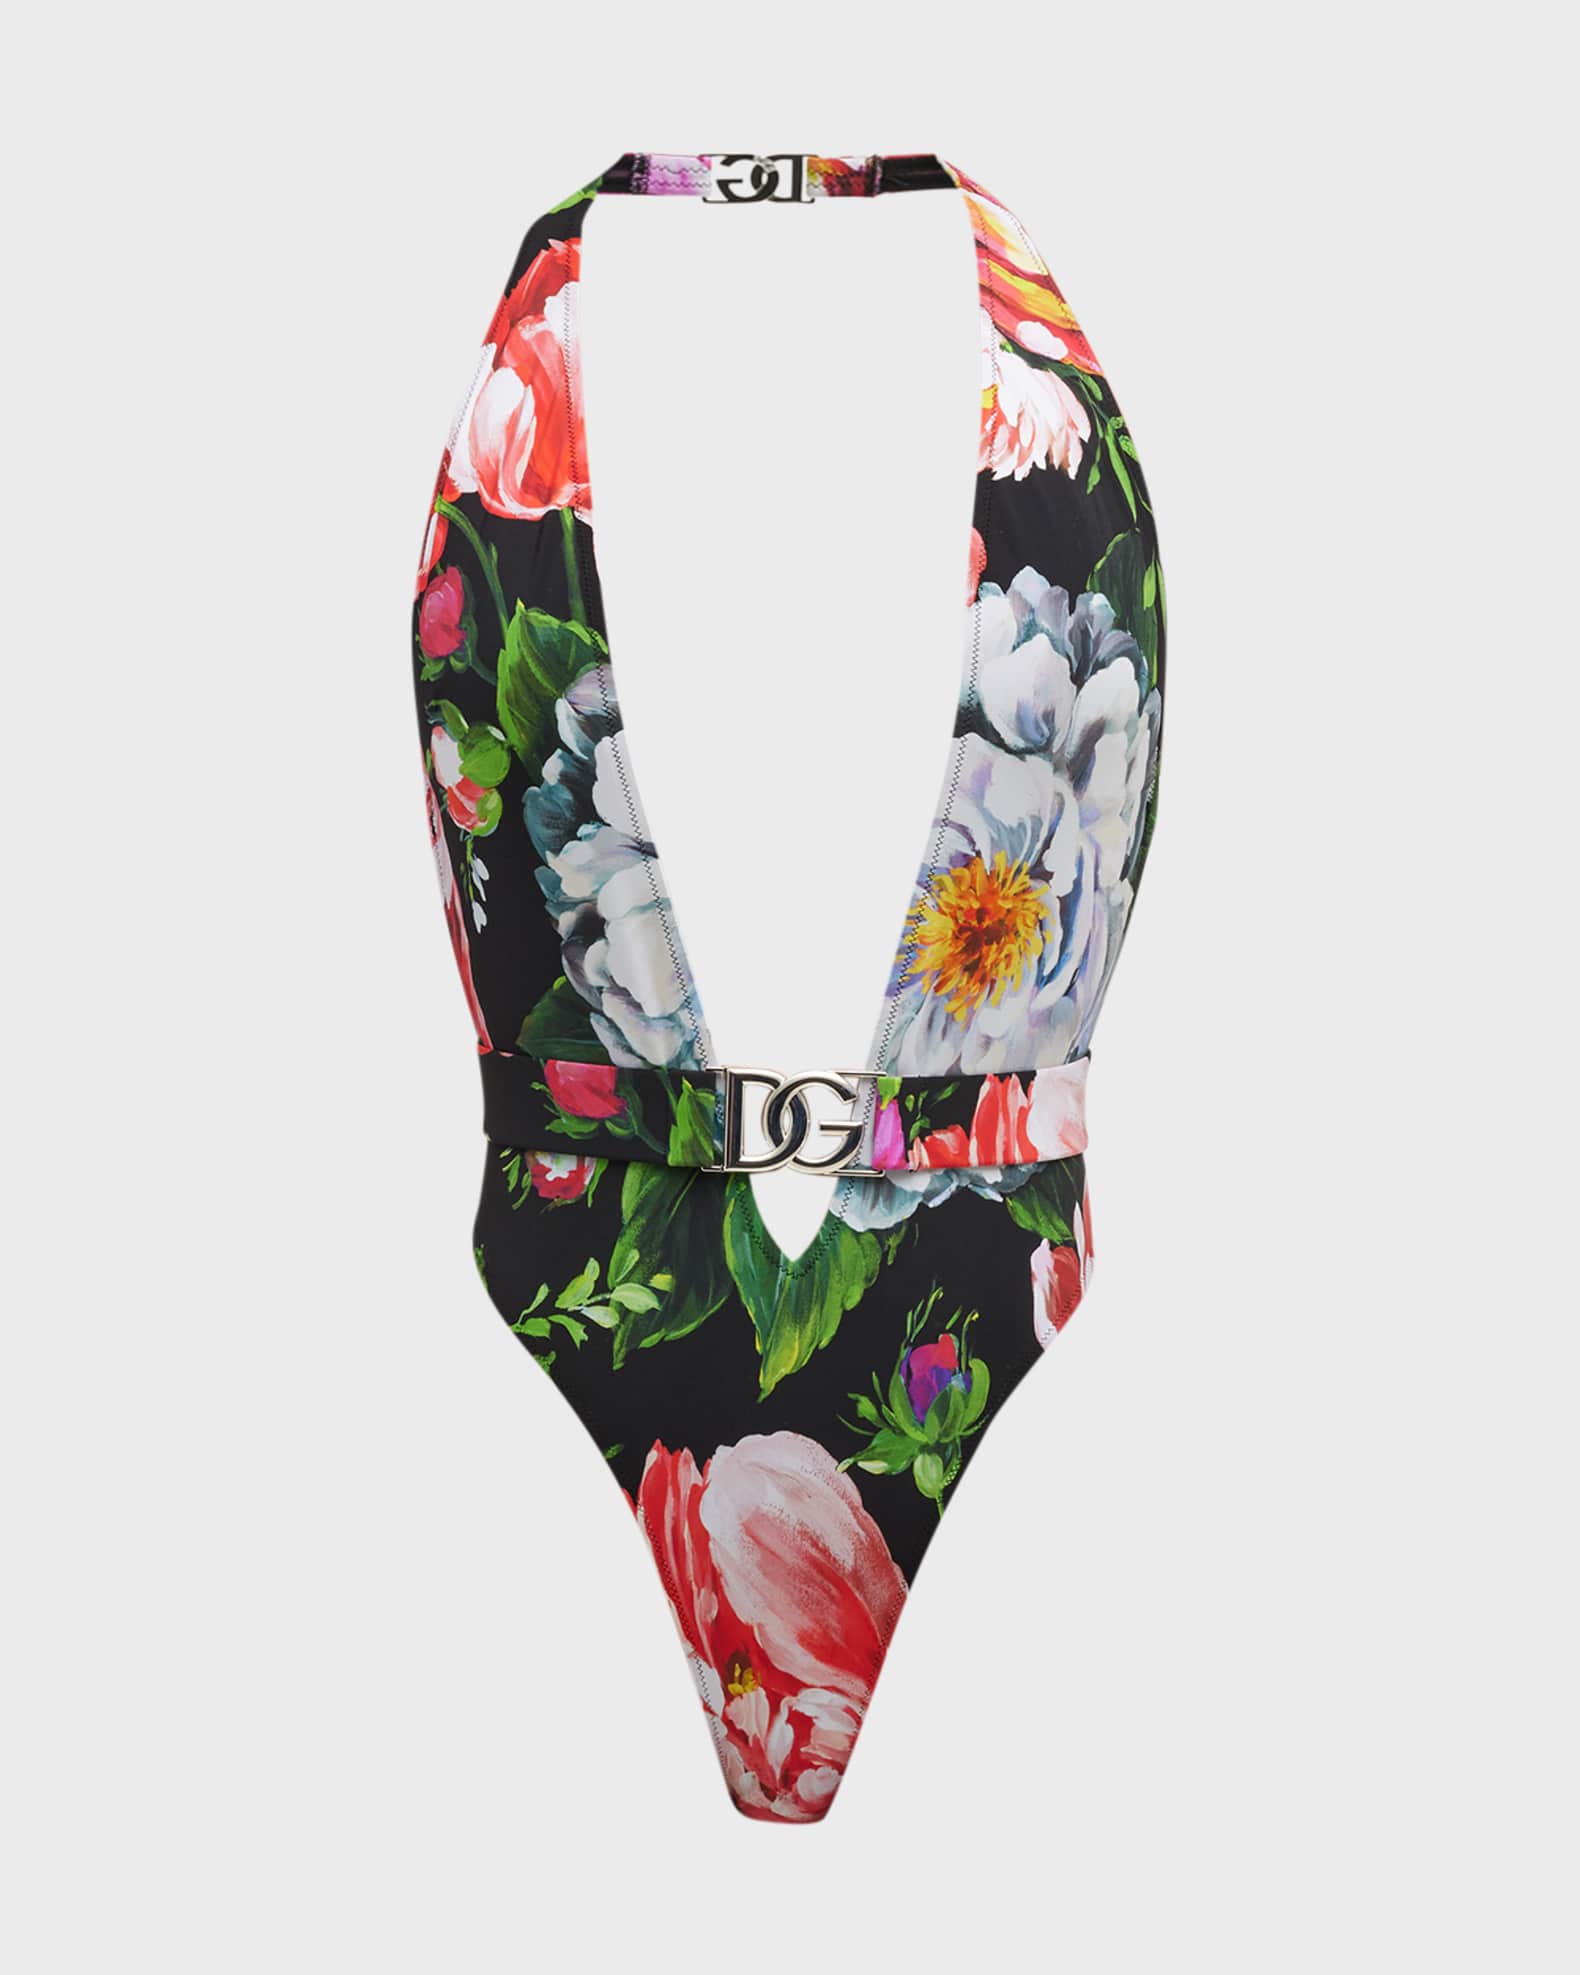 Dolce&Gabbana Belted Floral-Print Plunge One-Piece Swimsuit | Neiman Marcus